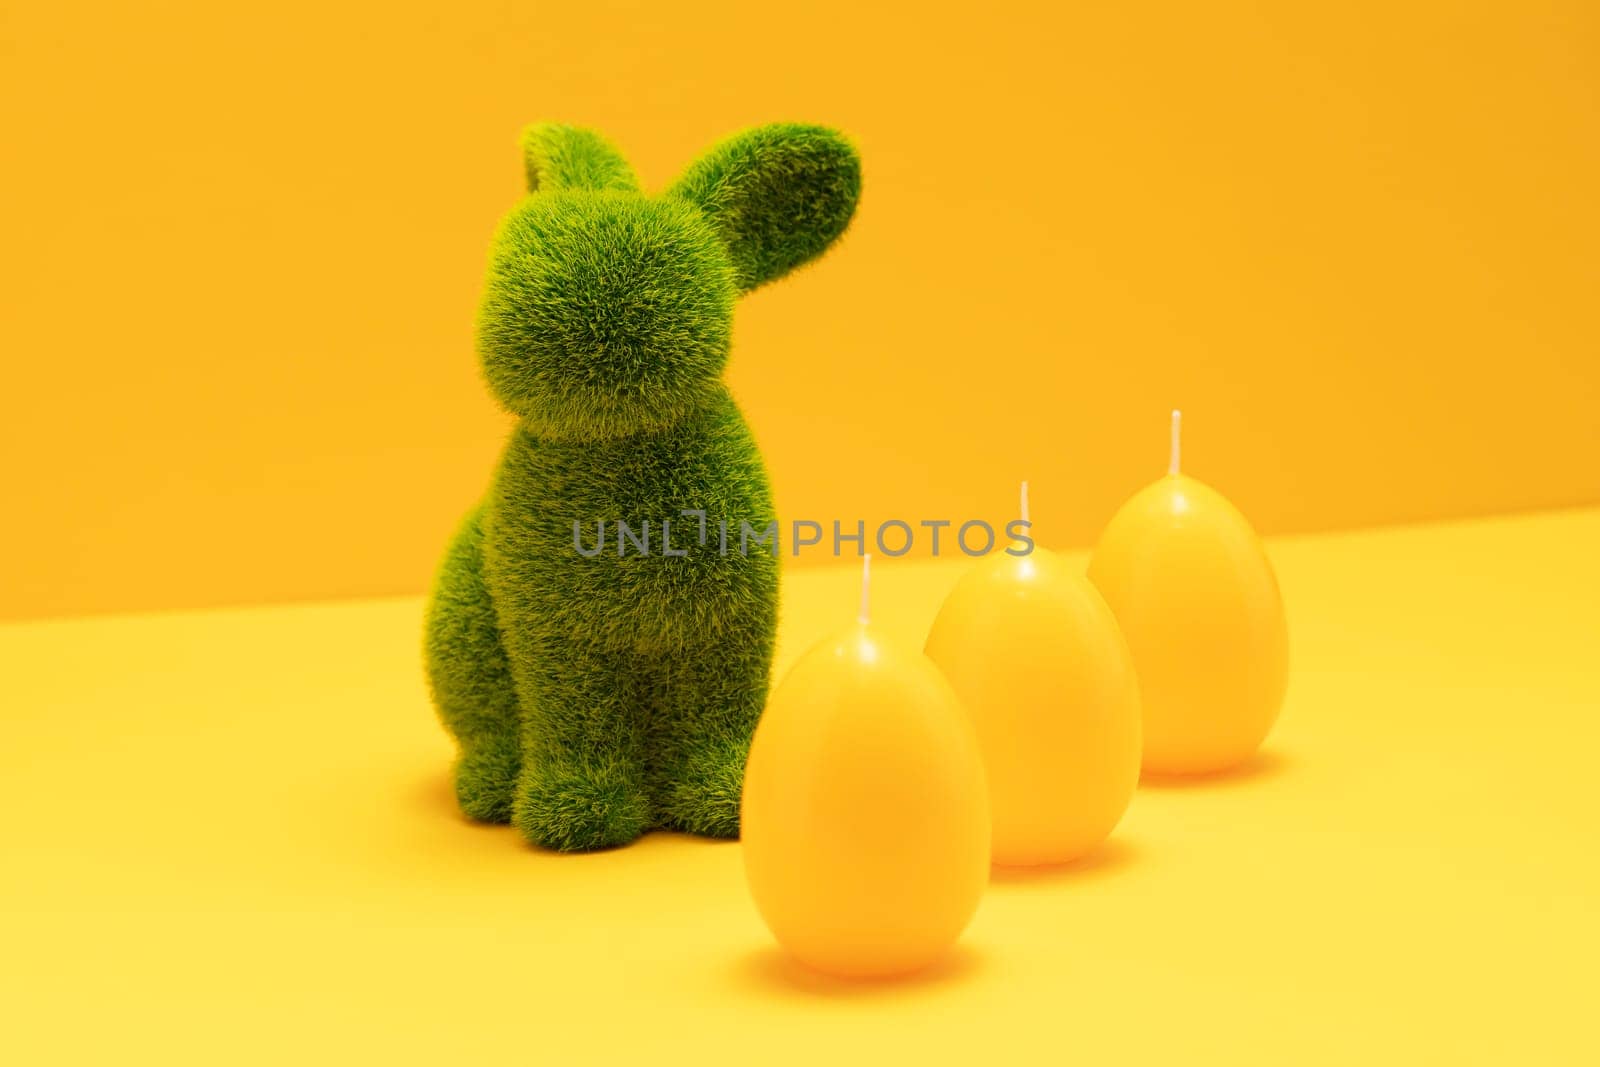 Green Easter Bunny with three yellow candles of eggs shape on matching monochrome orange background. Minimal Happy Easter holiday concept. Creative festive Easter greeting card, copy space for text. by netatsi